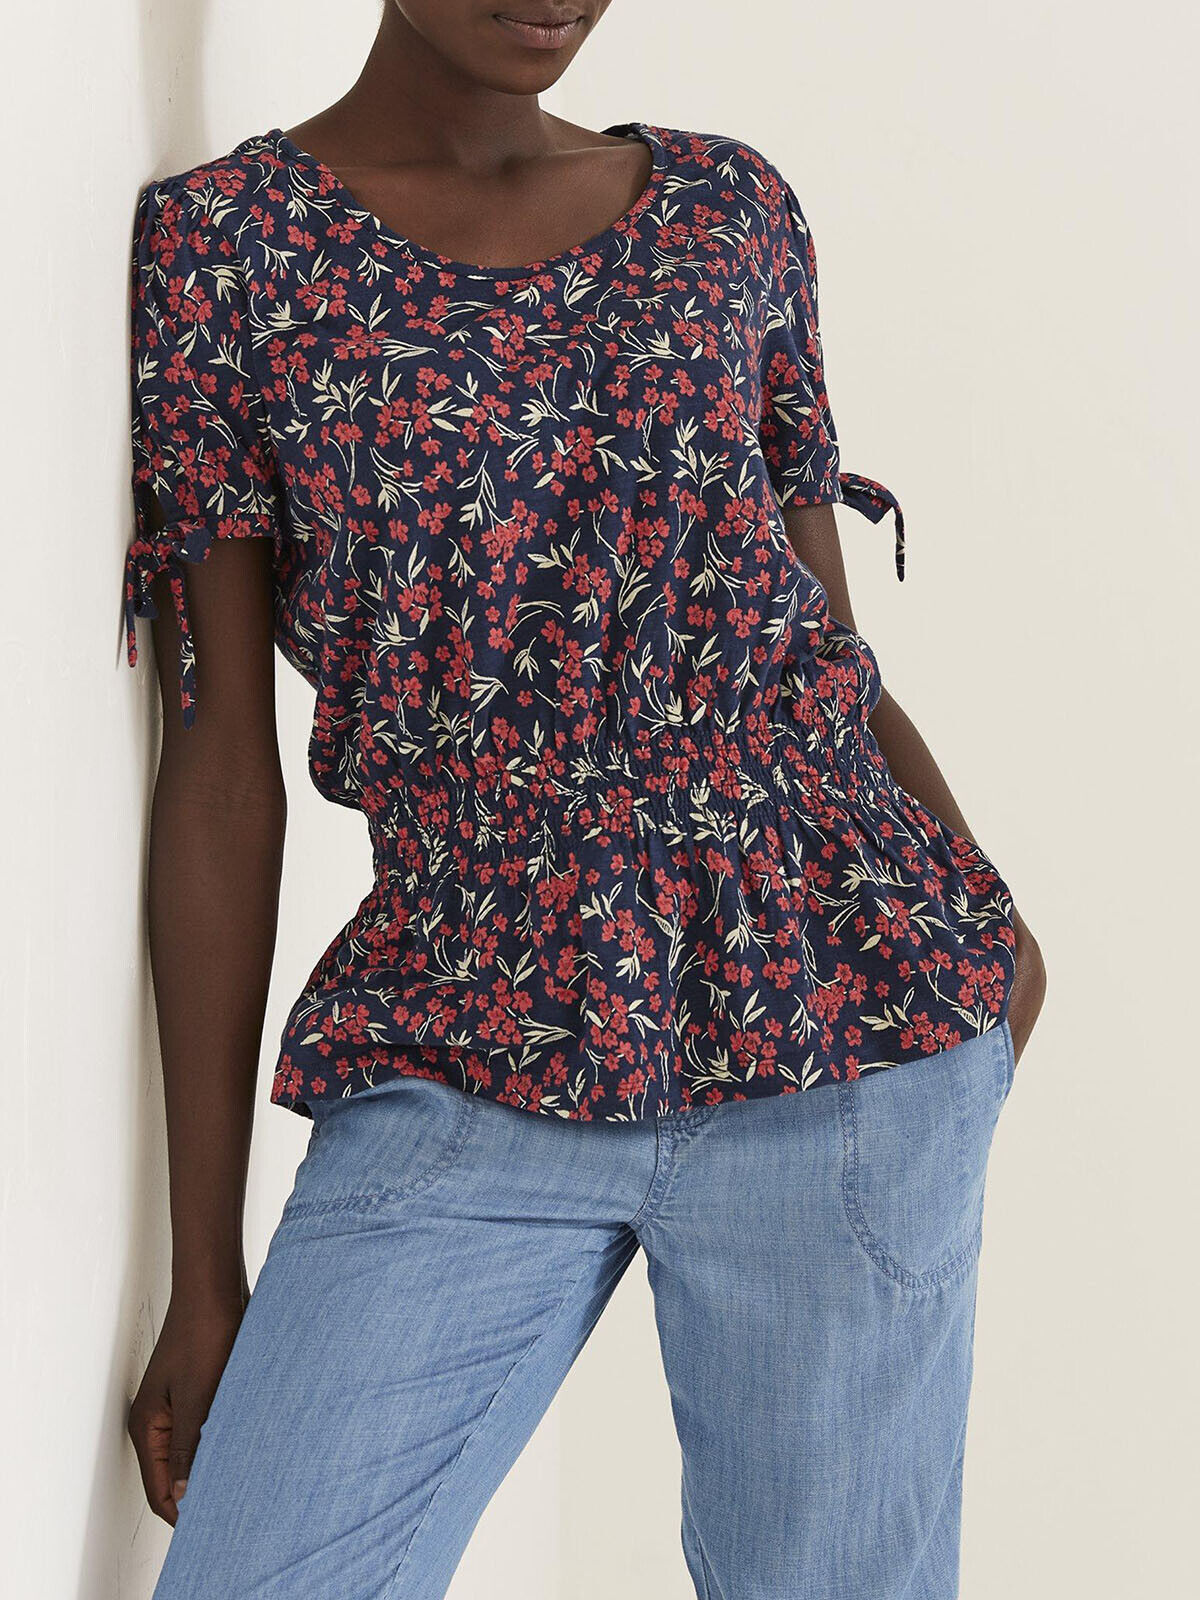 EX Fat Face Navy Alana Bay Floral Top in Sizes 8, 10, 12, 14, 16, 18 RRP £34